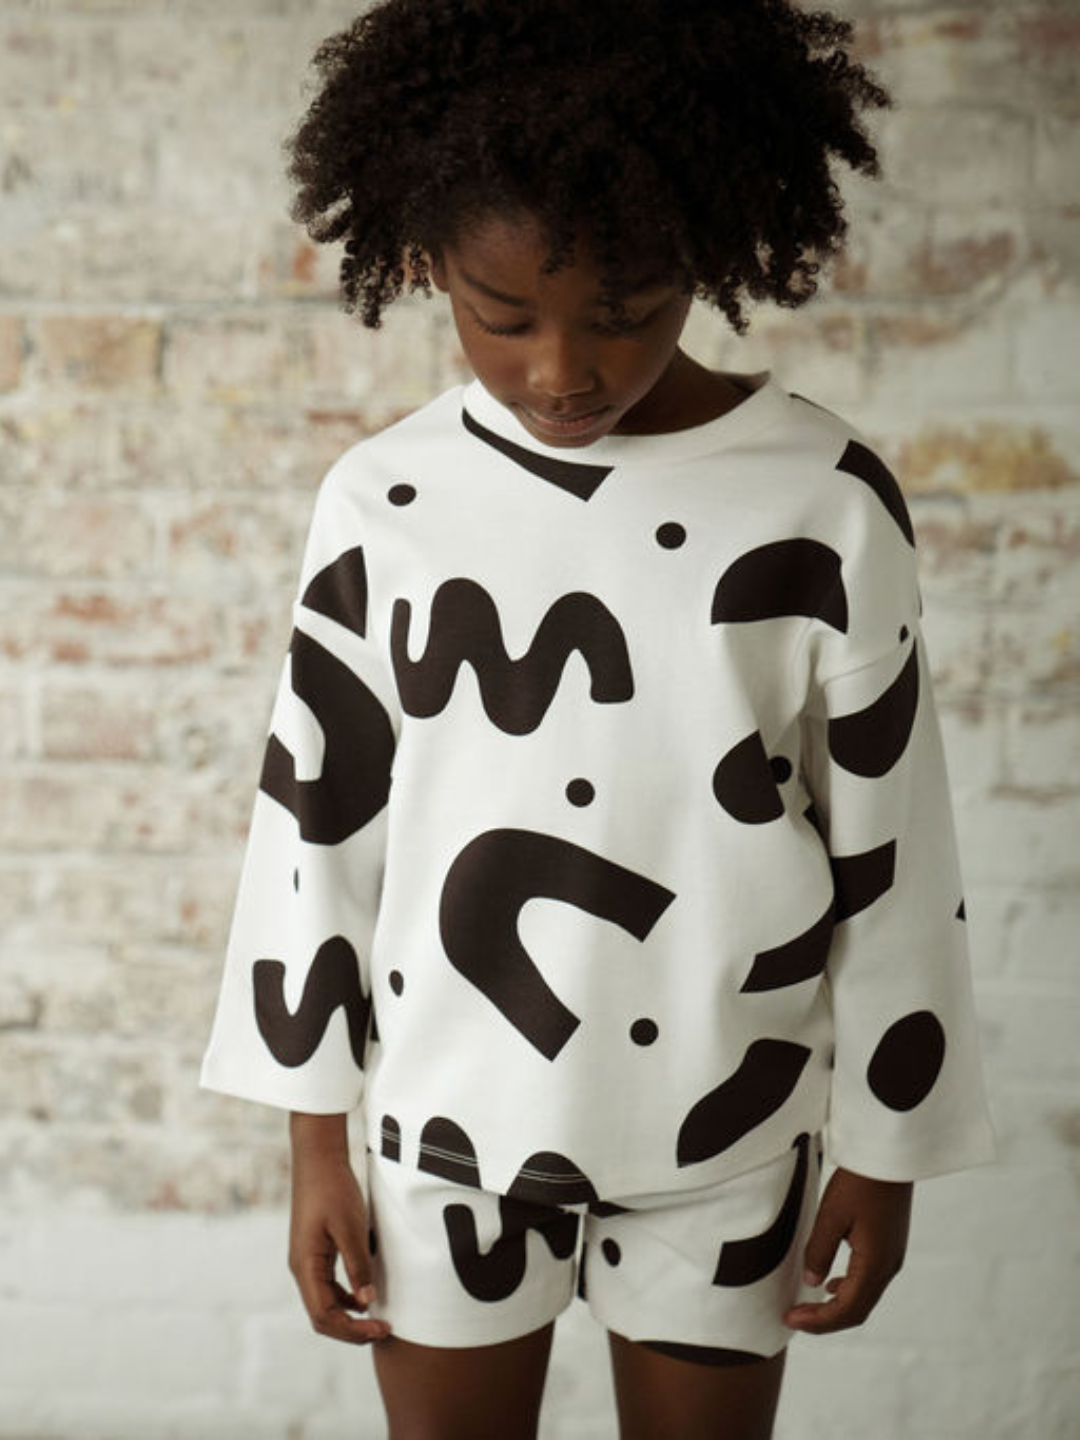 A child wearing a kids' tee long-sleeved shirt in a pattern of black squiggles and dots on a white background, with matching shorts